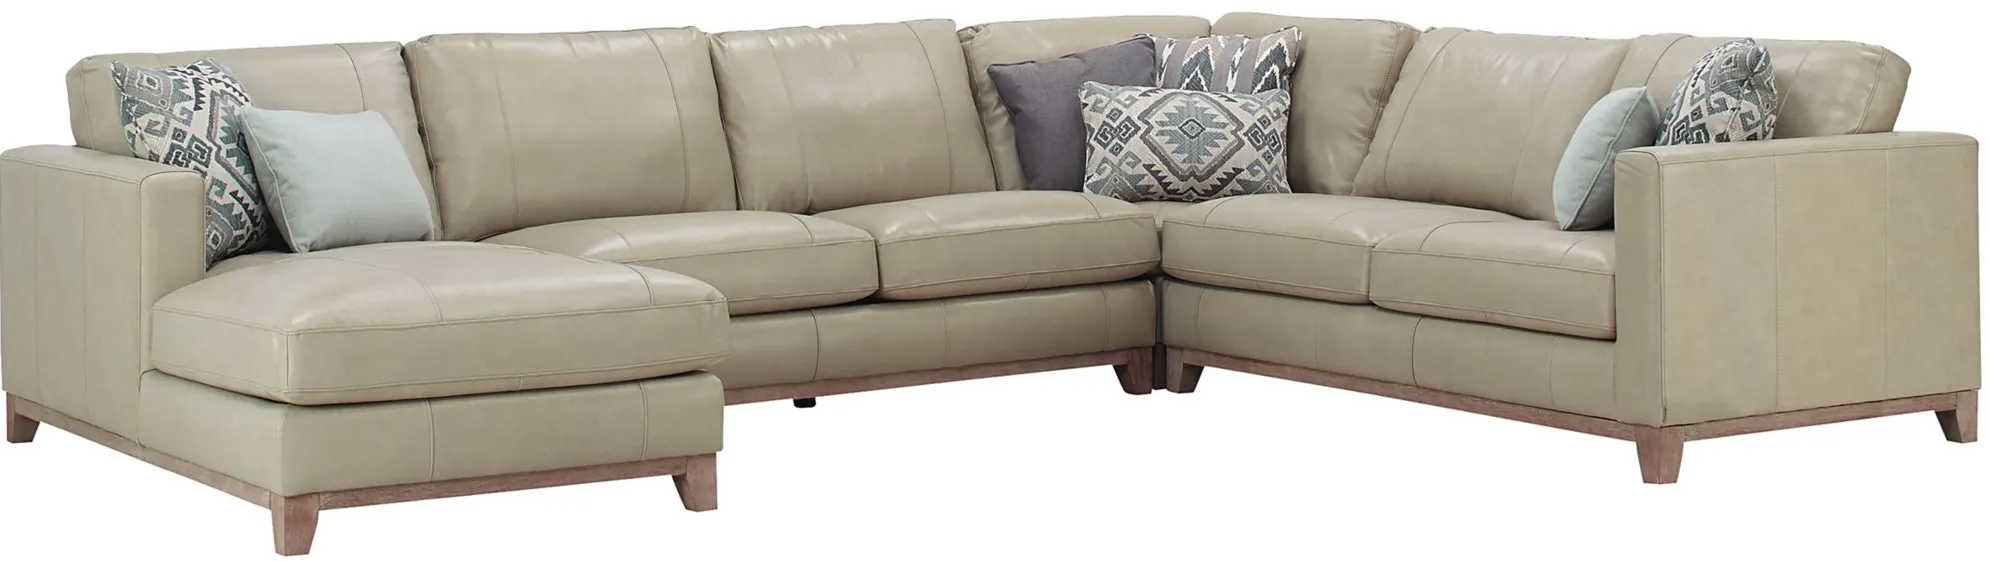 Ryland 4-pc Sectional in Beige by Bellanest